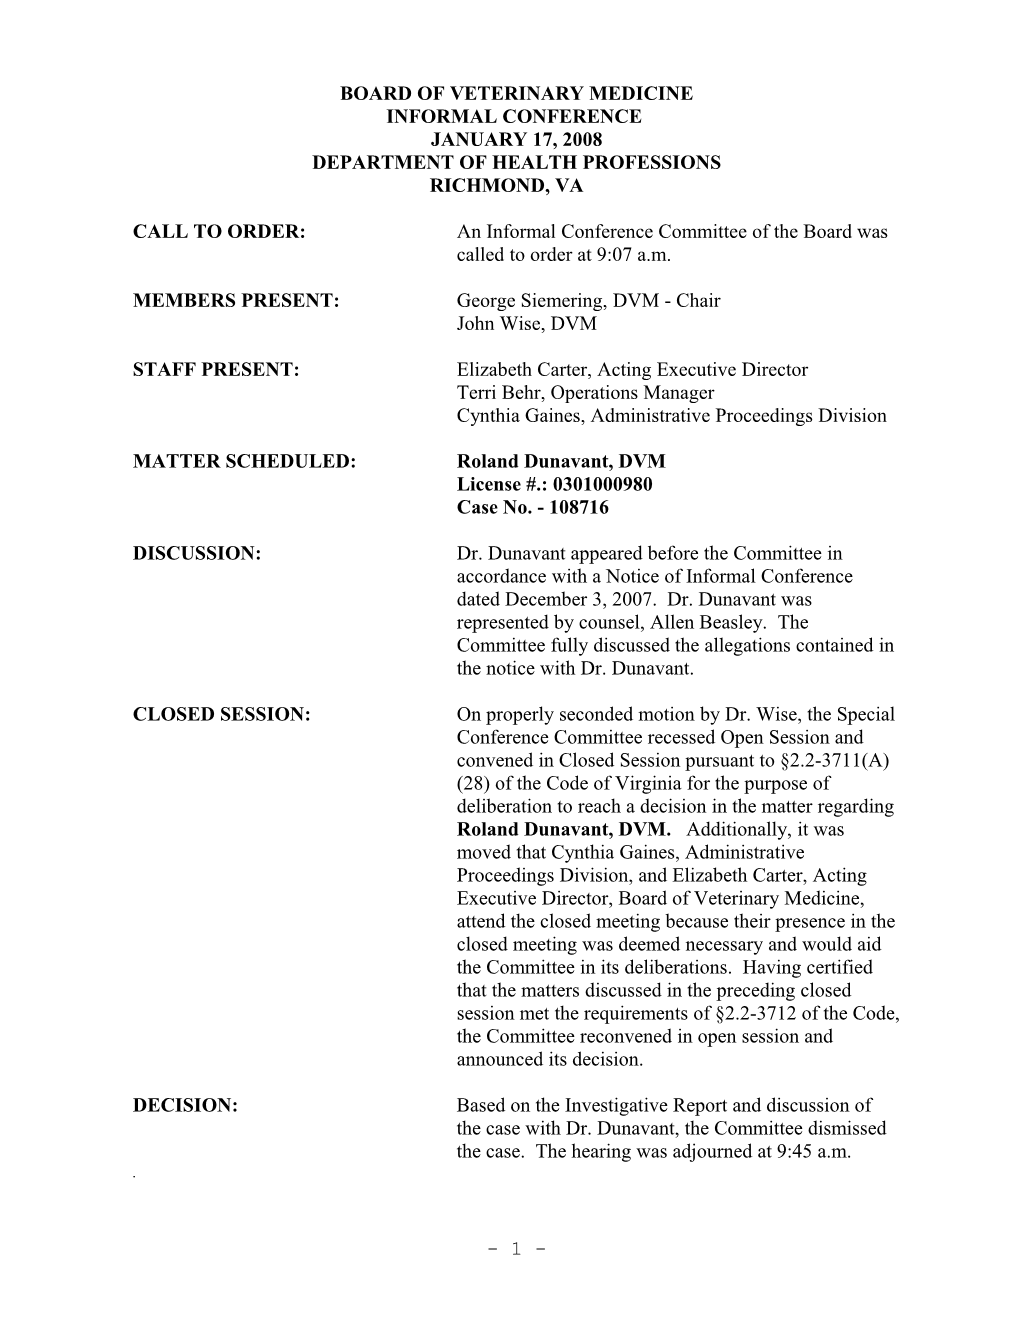 Board of Veterinary Medicine - Informal Conference Minutes - January 17, 2008